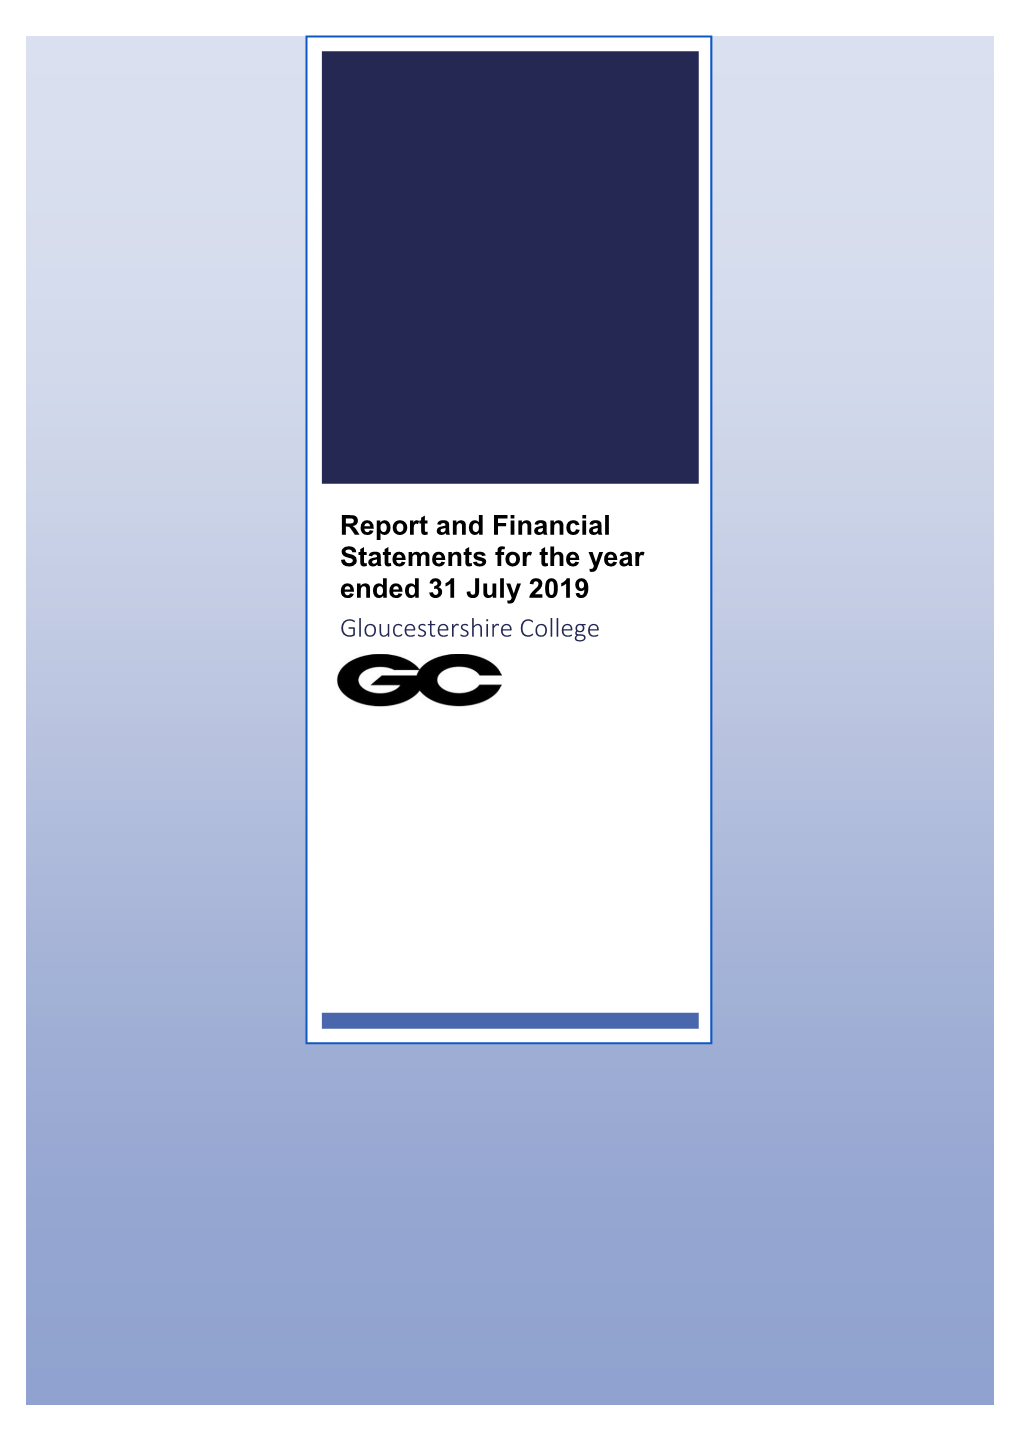 Report and Financial Statements for the Year Ended 31 July 2019 Gloucestershire College